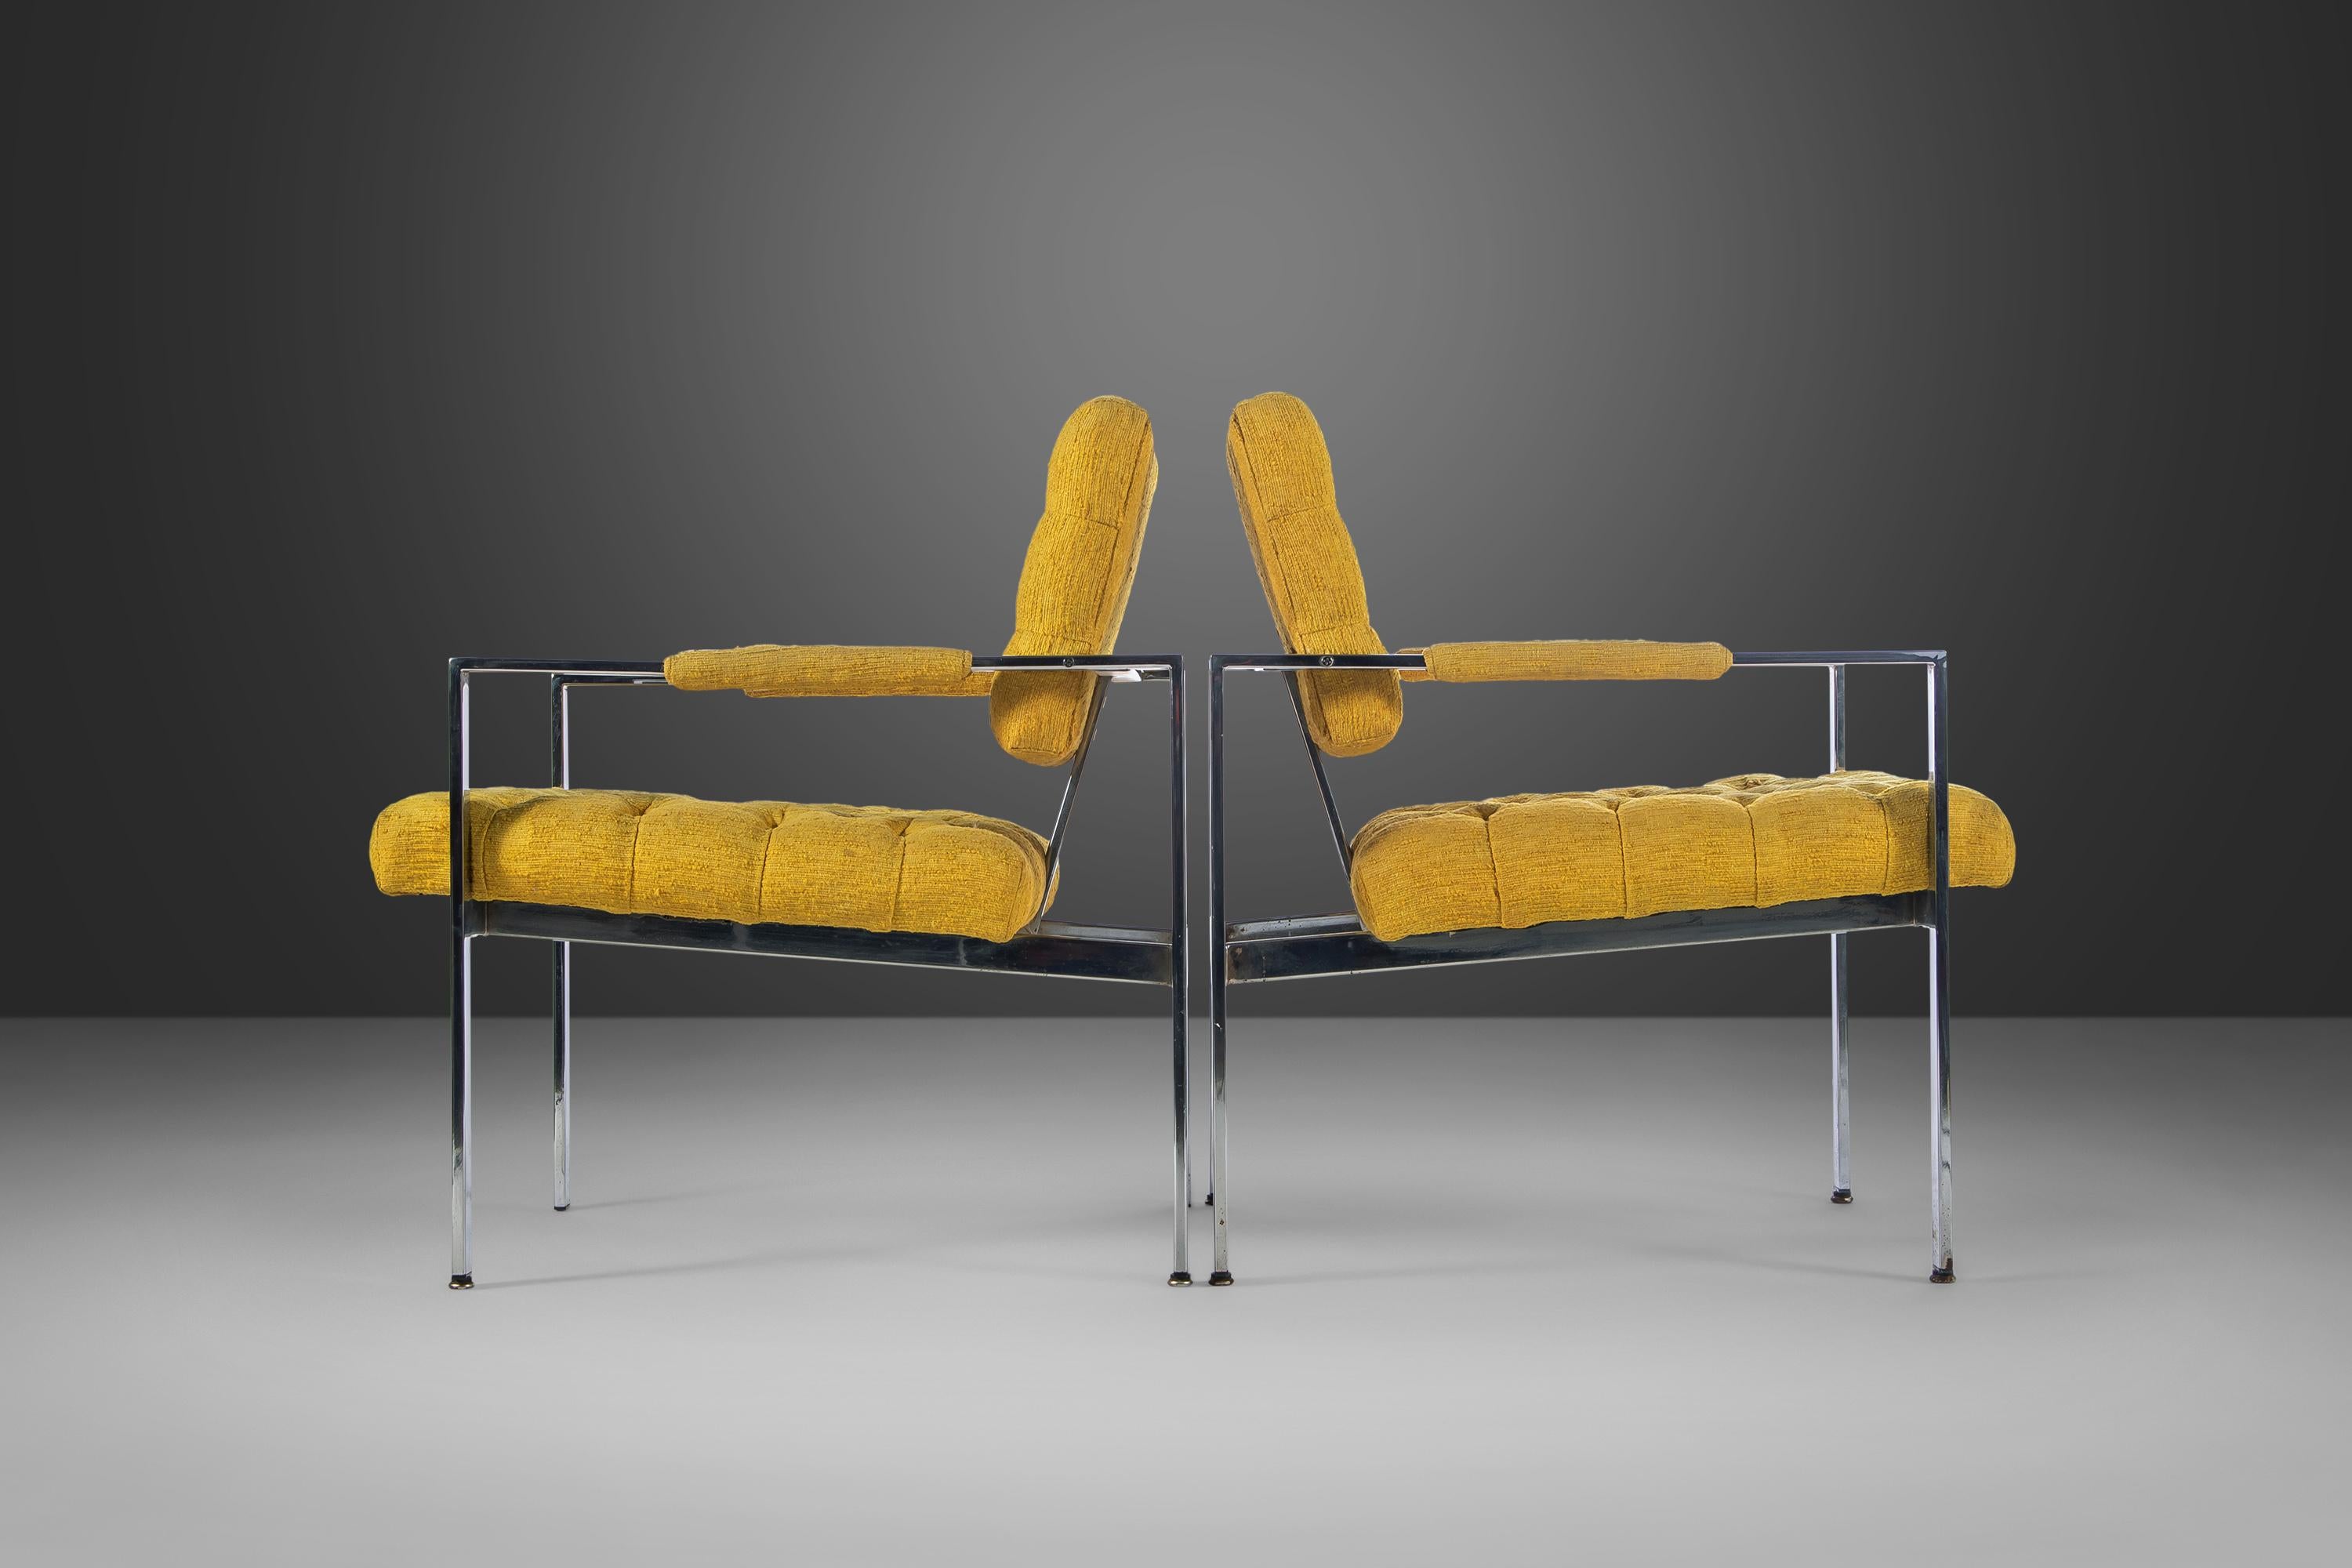 Pair of Chrome Lounge Chairs by Milo Baughman for Thayer Coggin, USA, c. 1970's For Sale 3